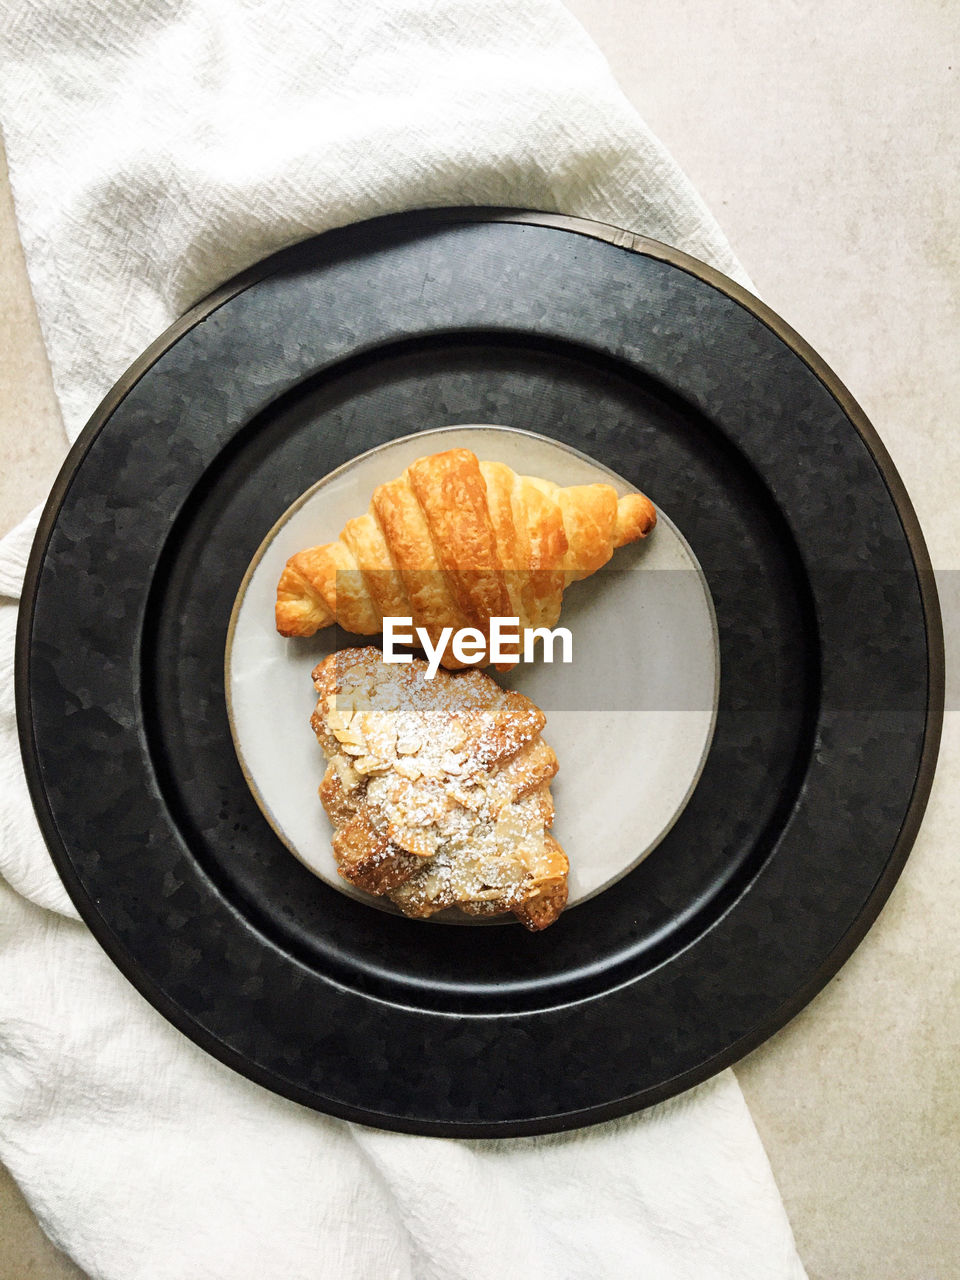 HIGH ANGLE VIEW OF BREAKFAST SERVED IN PLATE